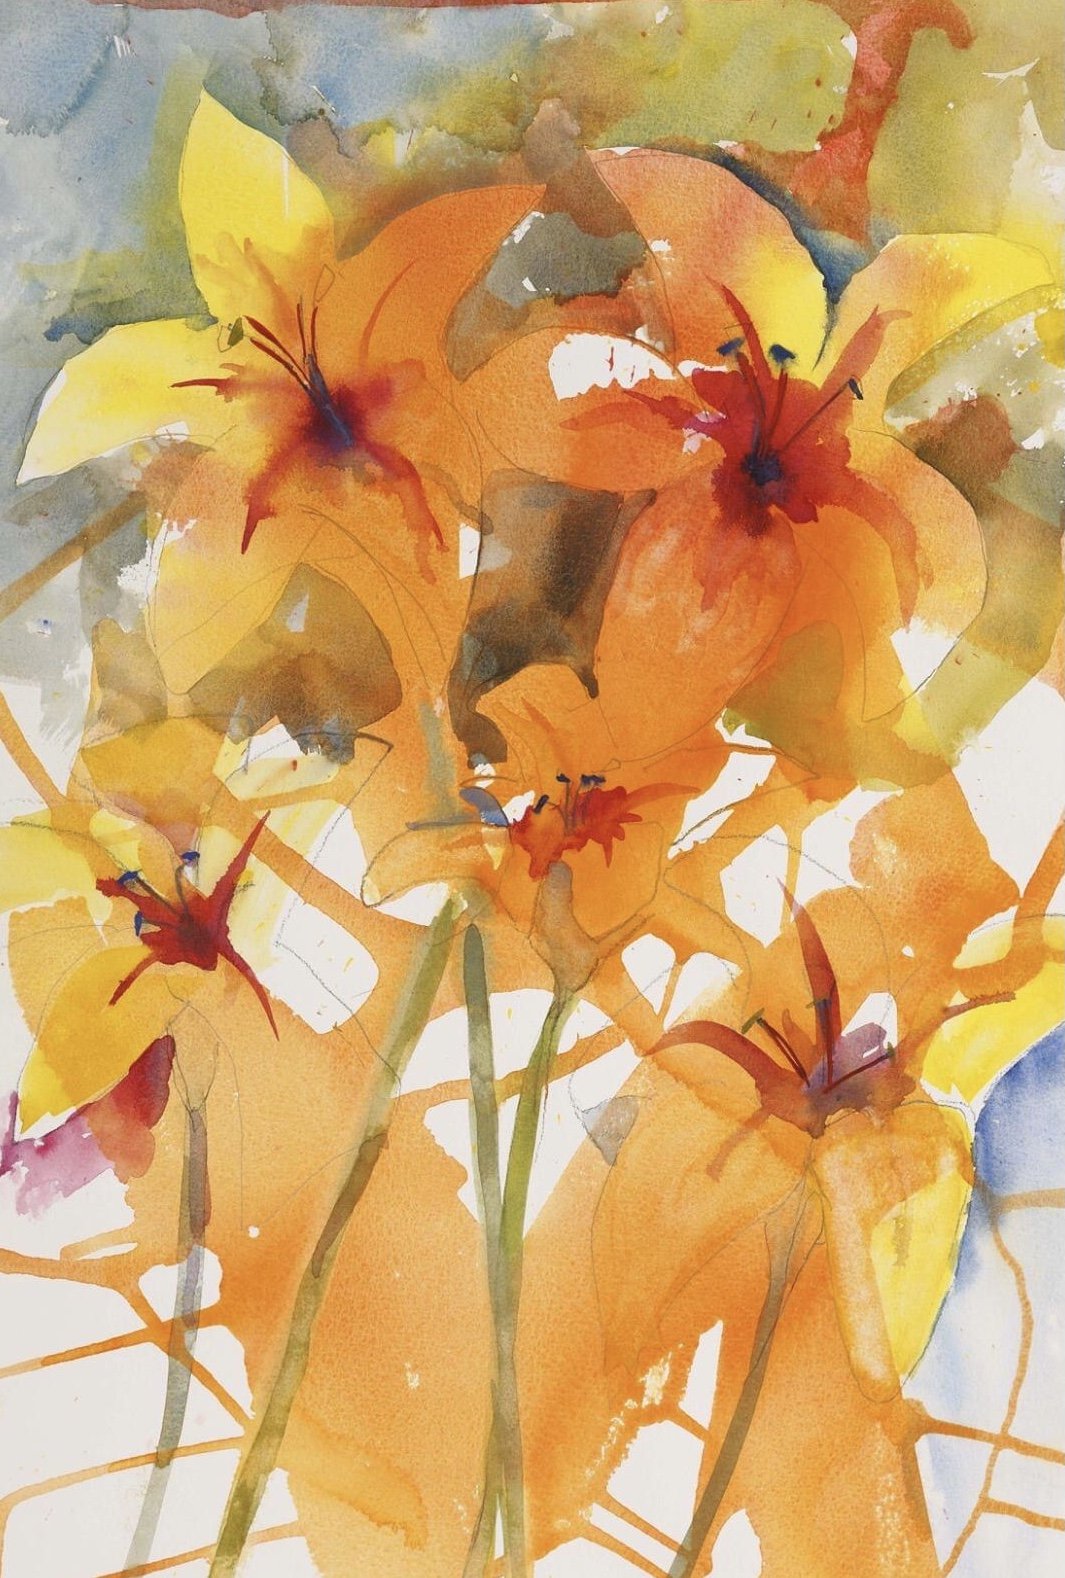    Daylilies  , 20” x 15”, watercolor on paper 